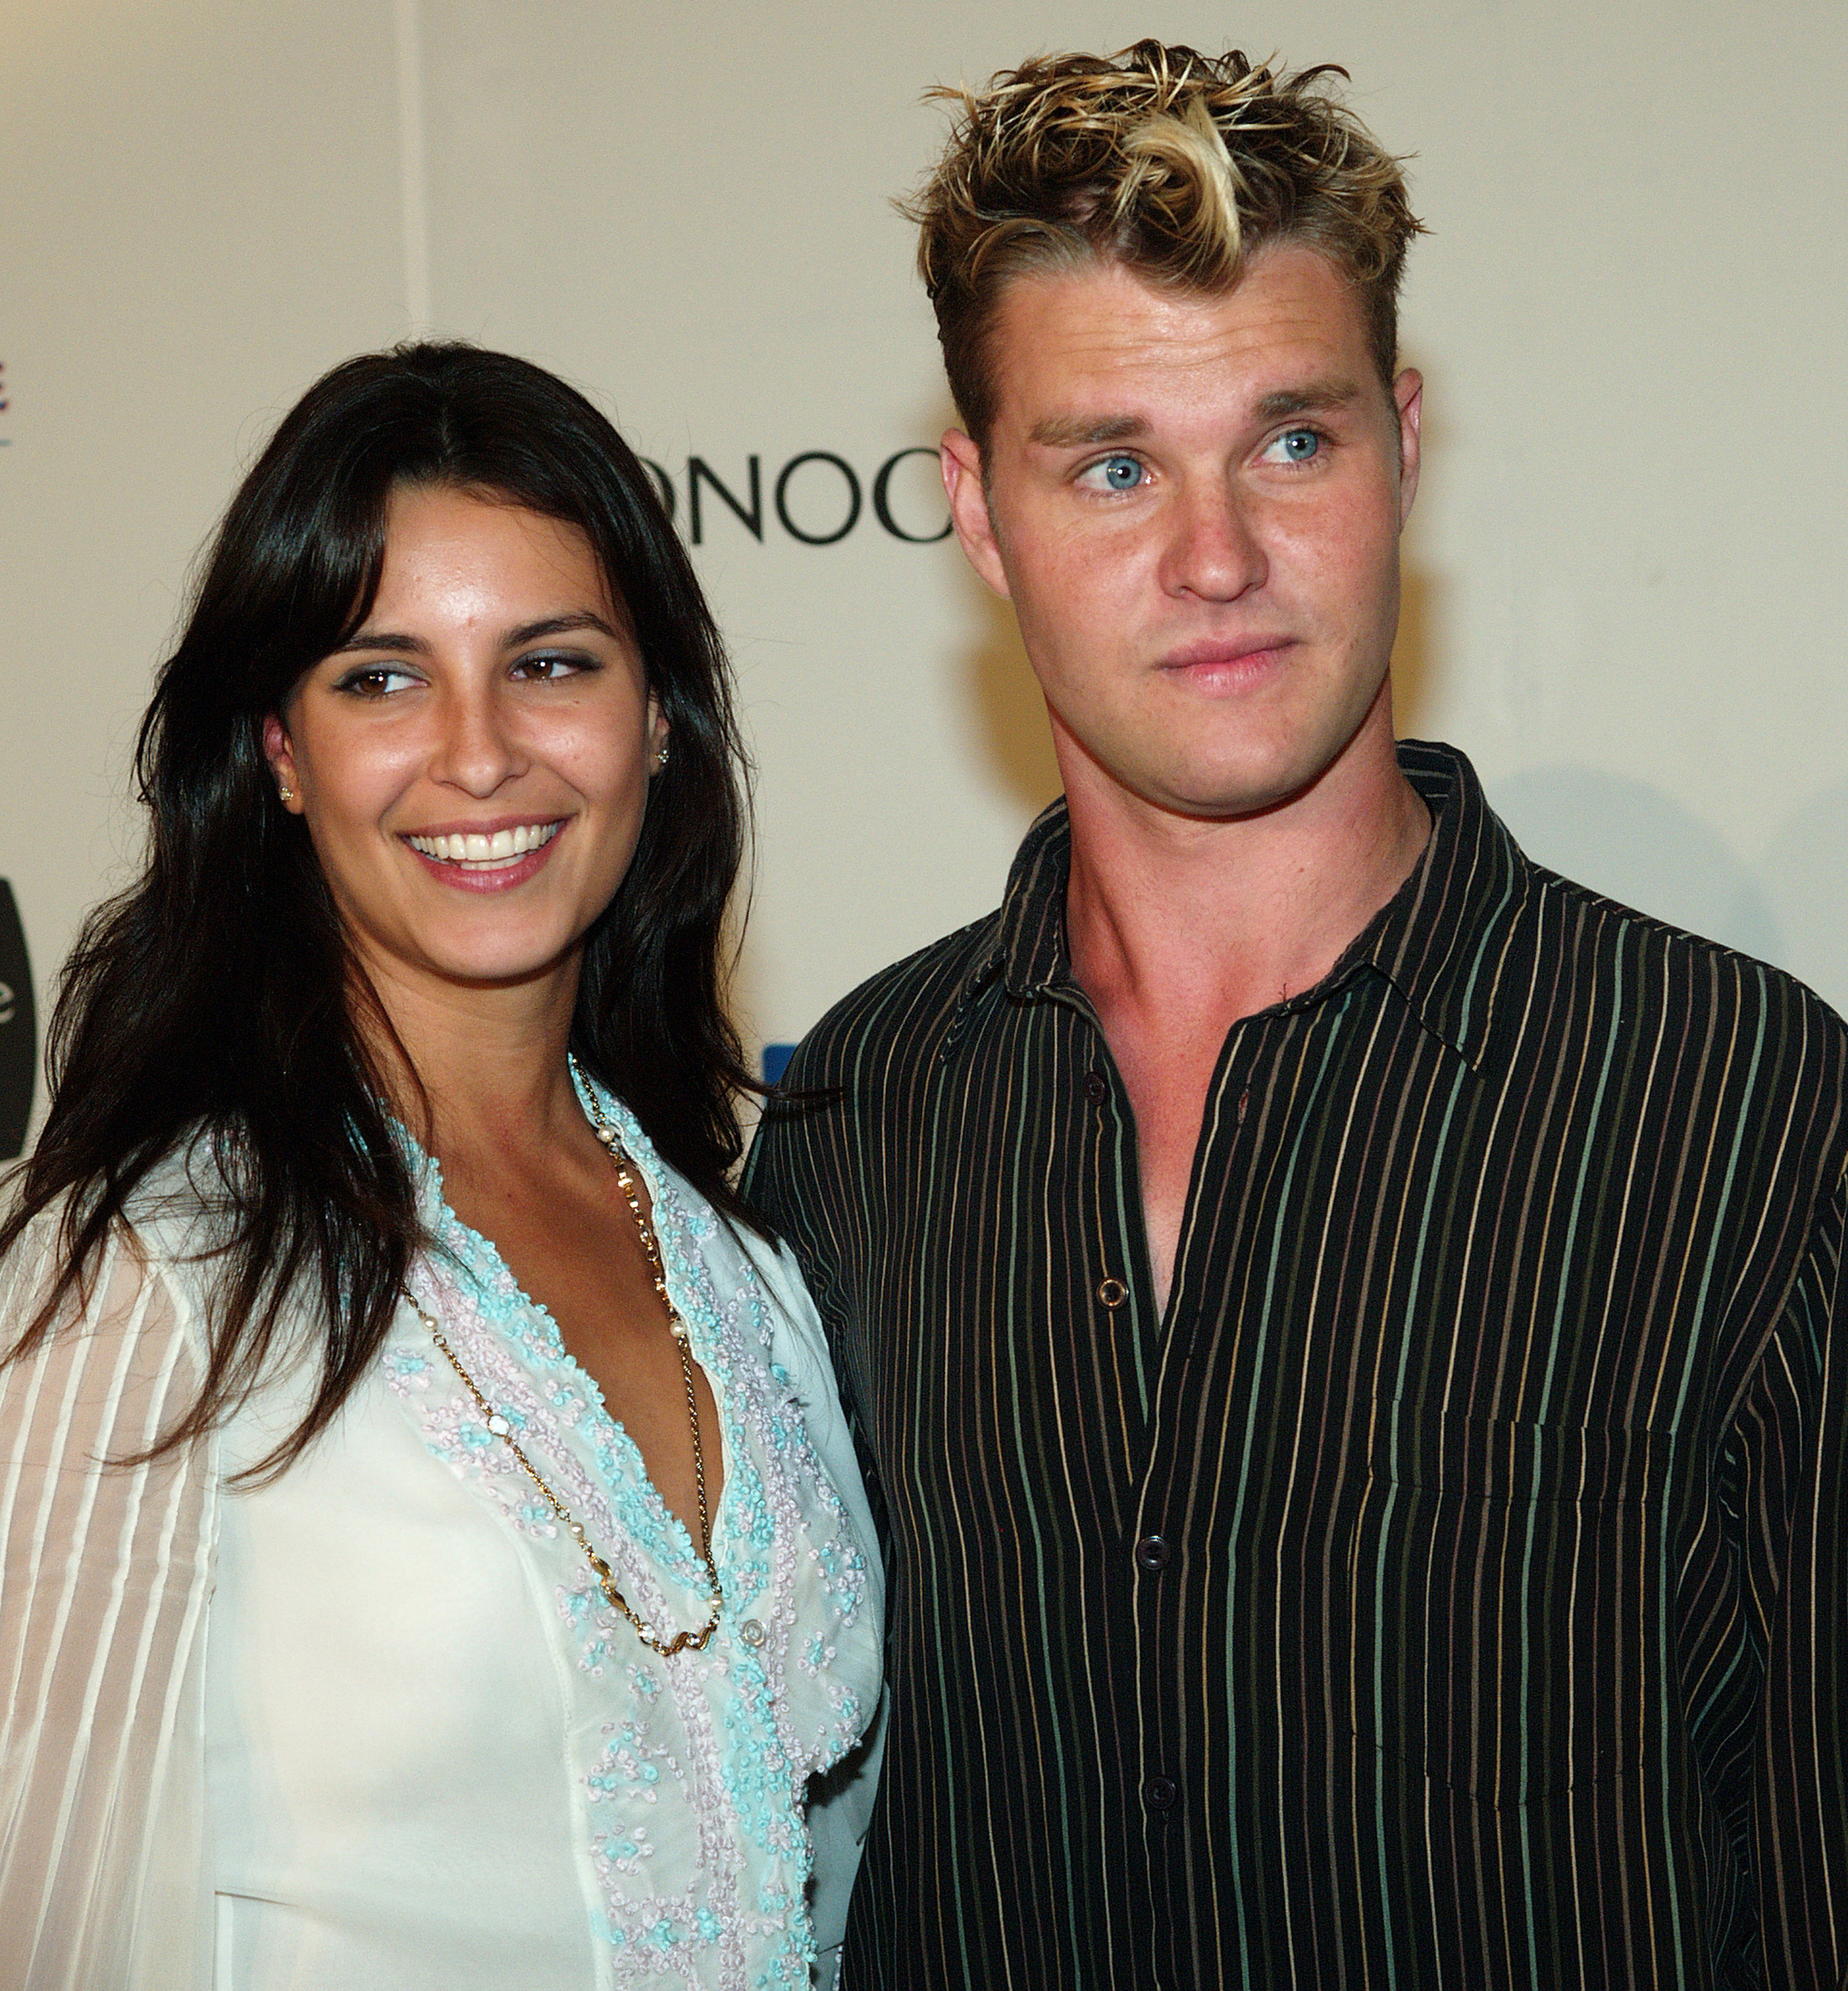 Zachery Ty Bryan with Carly Matros in Santa Monica, California. | Source: Getty Images